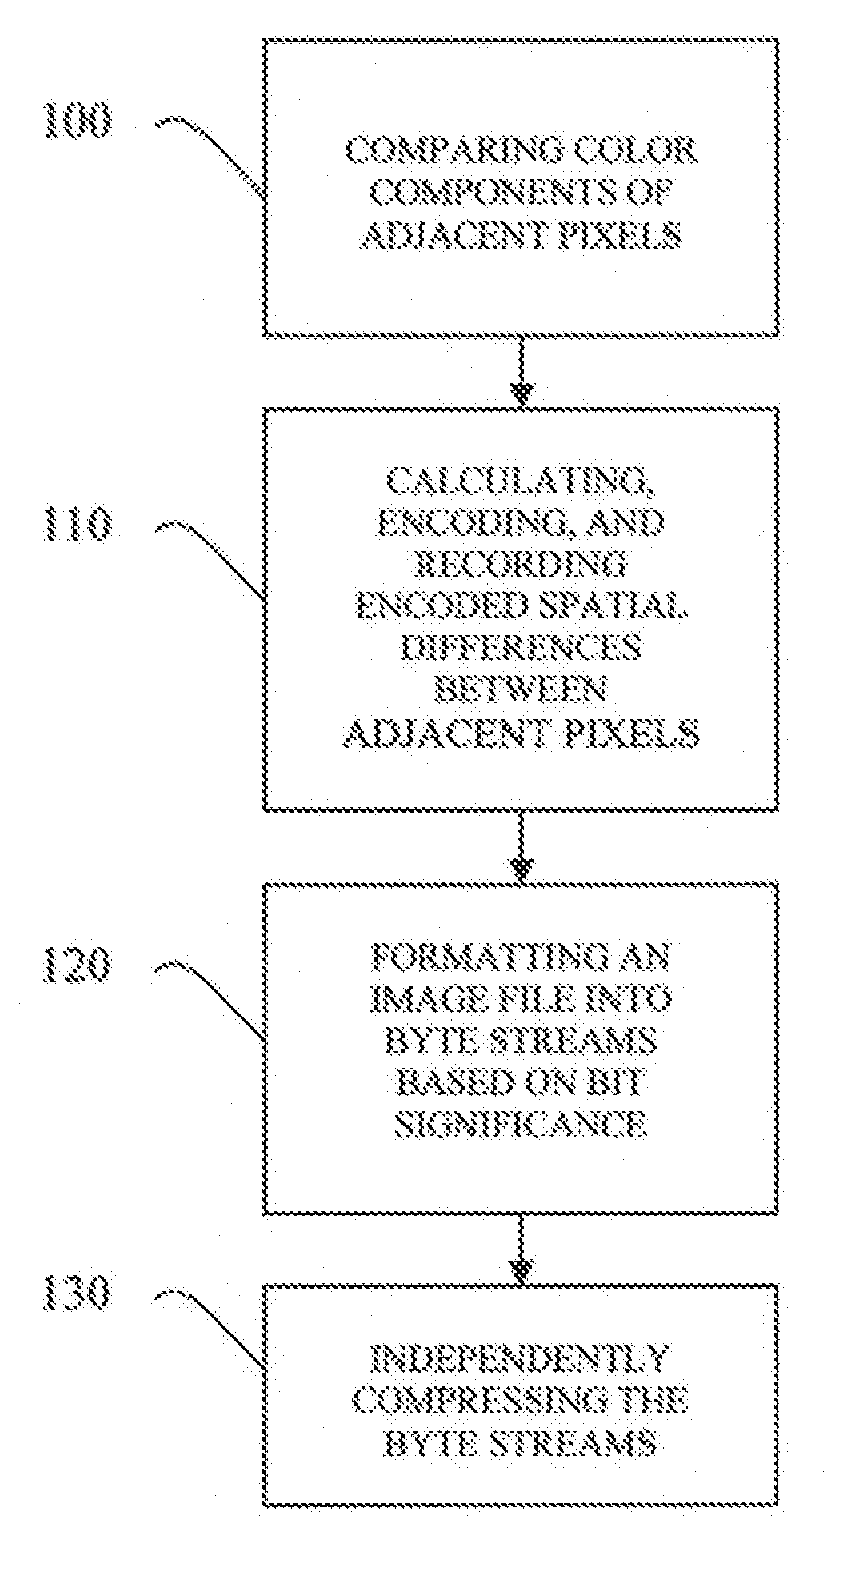 Adaptive lossless data compression method for compression of color image data